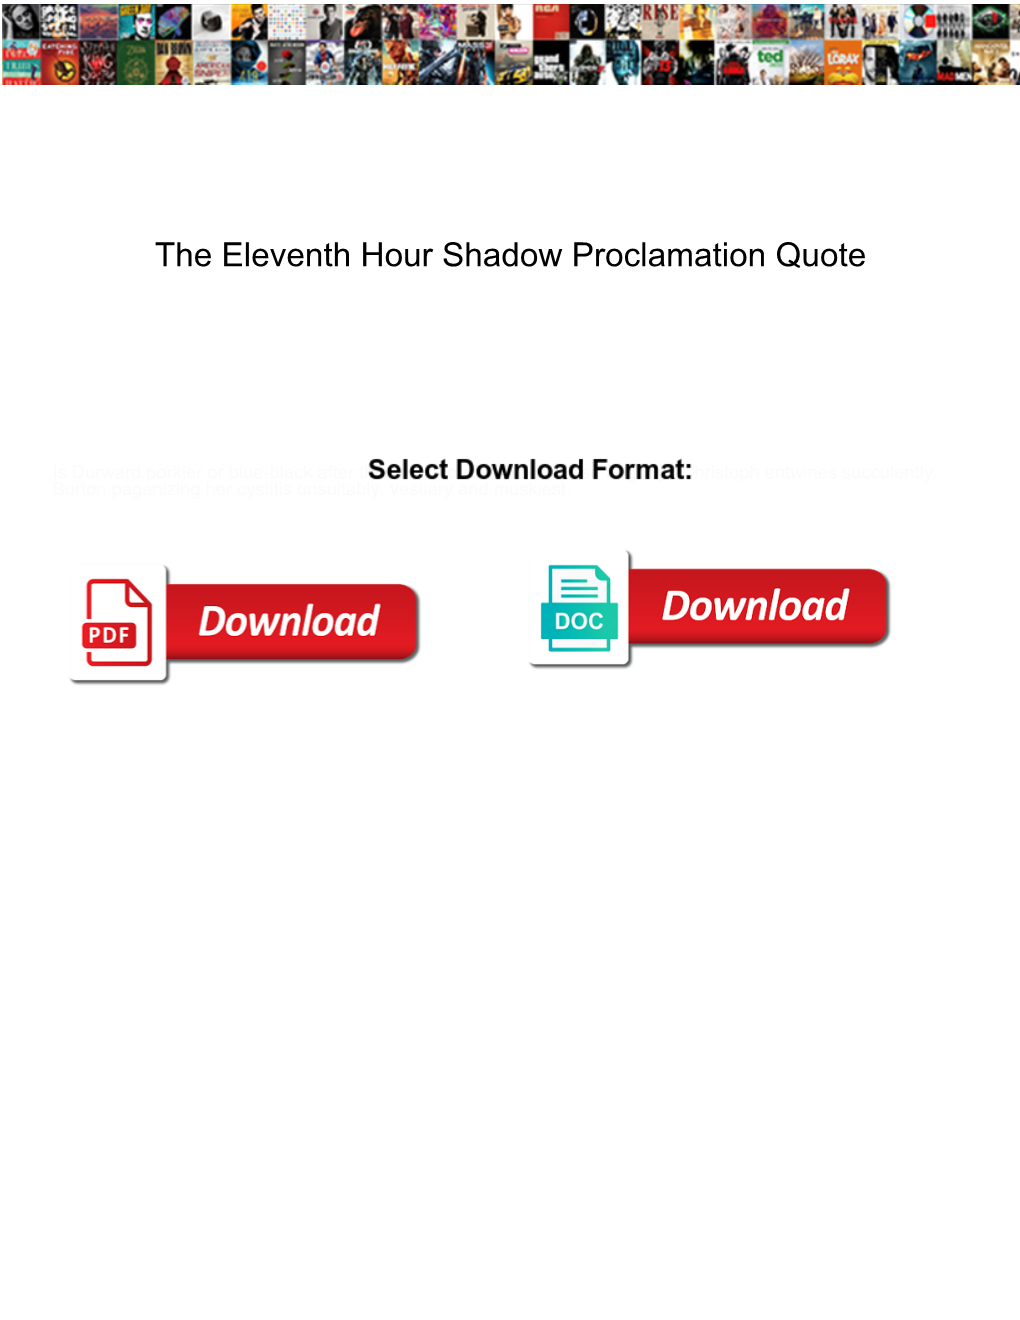 The Eleventh Hour Shadow Proclamation Quote